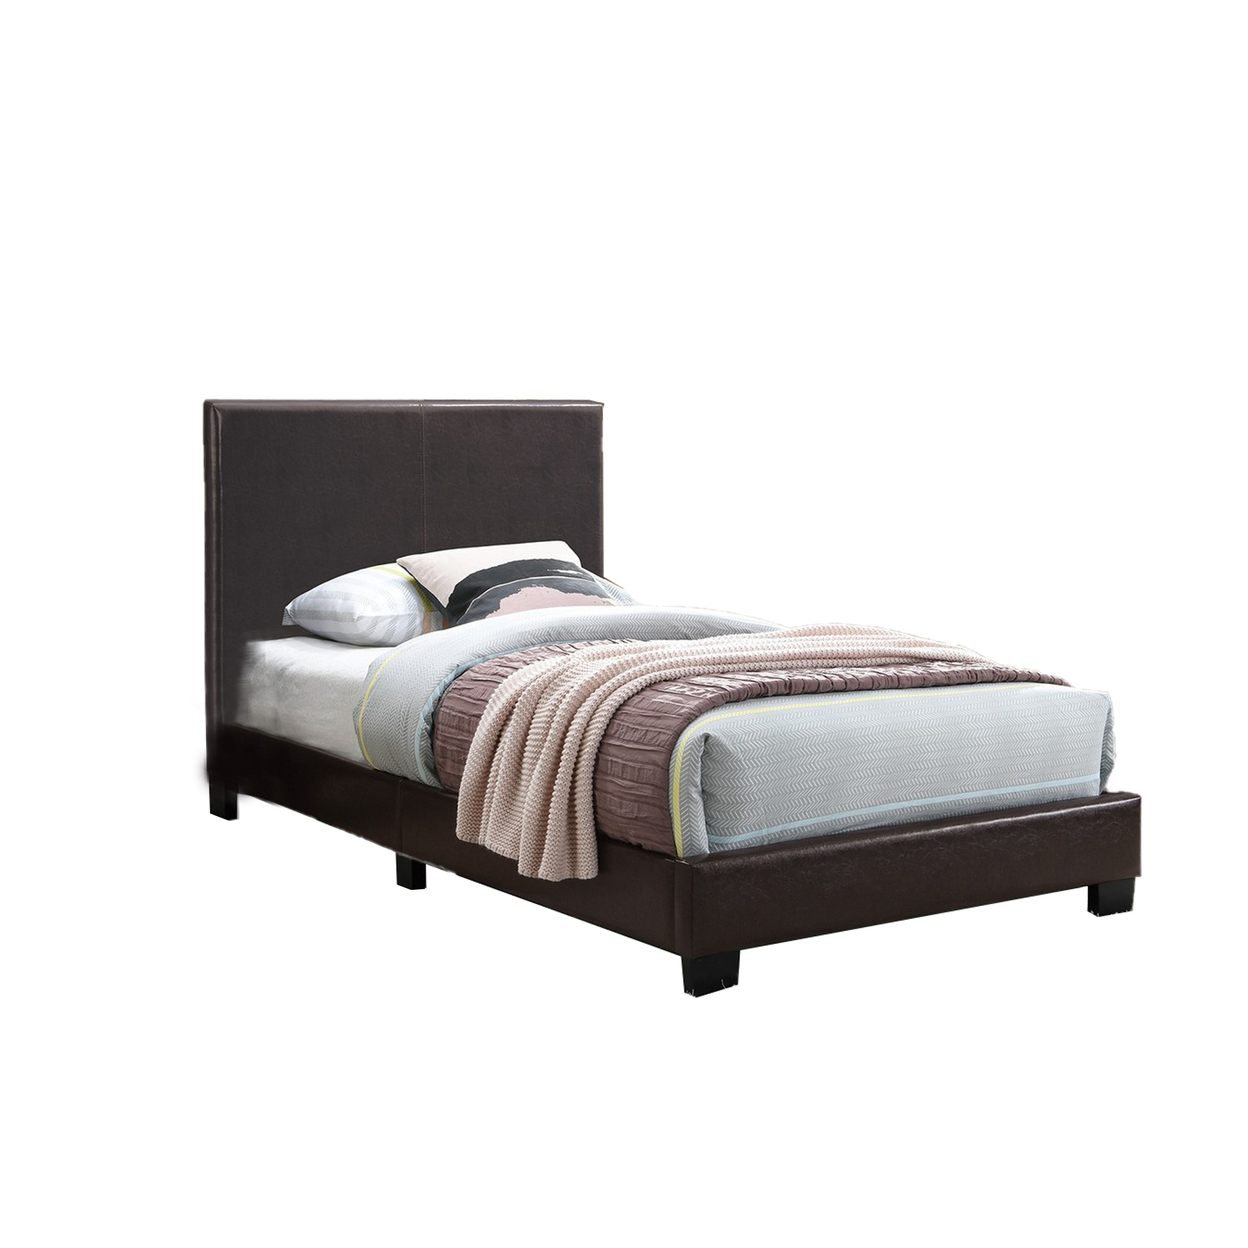 Transitional Style Leatherette Queen Bed With Padded Headboard, Dark Brown- Saltoro Sherpi